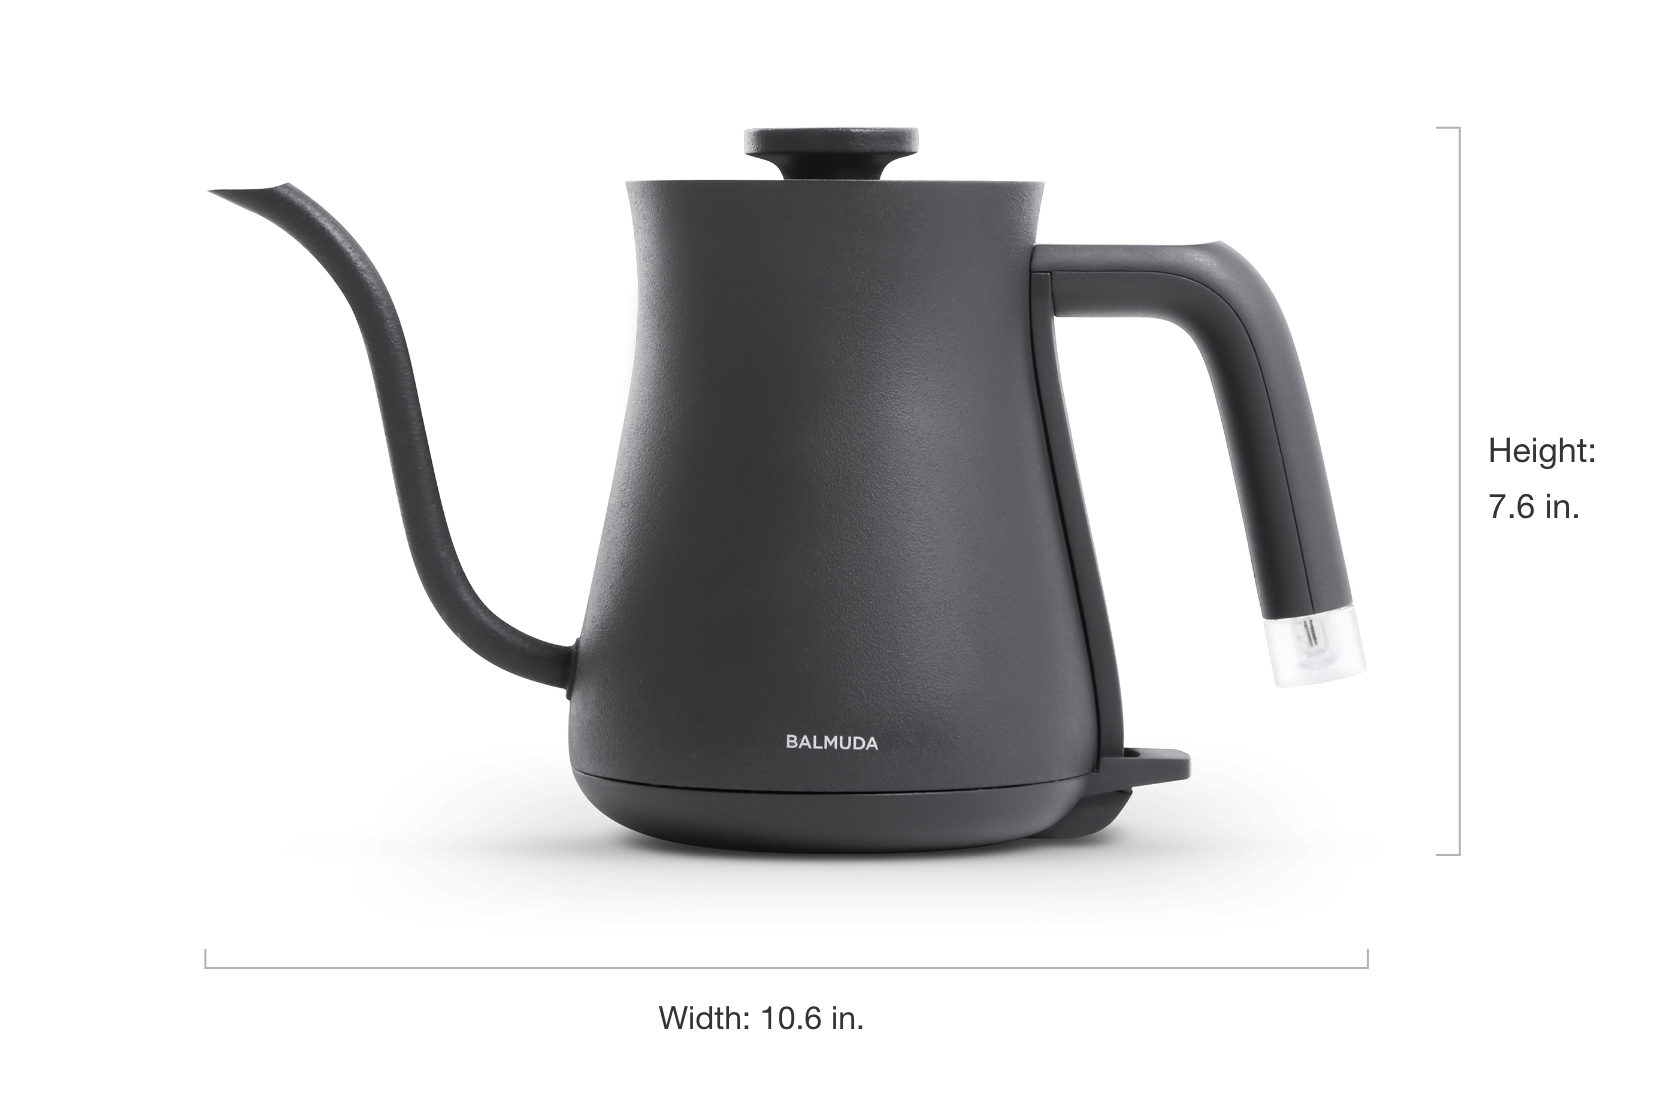 BALMUDA Combo Pack in Black | BALMUDA The Toaster & BALMUDA The Kettle |  Steam Toaster and Electric Gooseneck Kettle | Black Combo